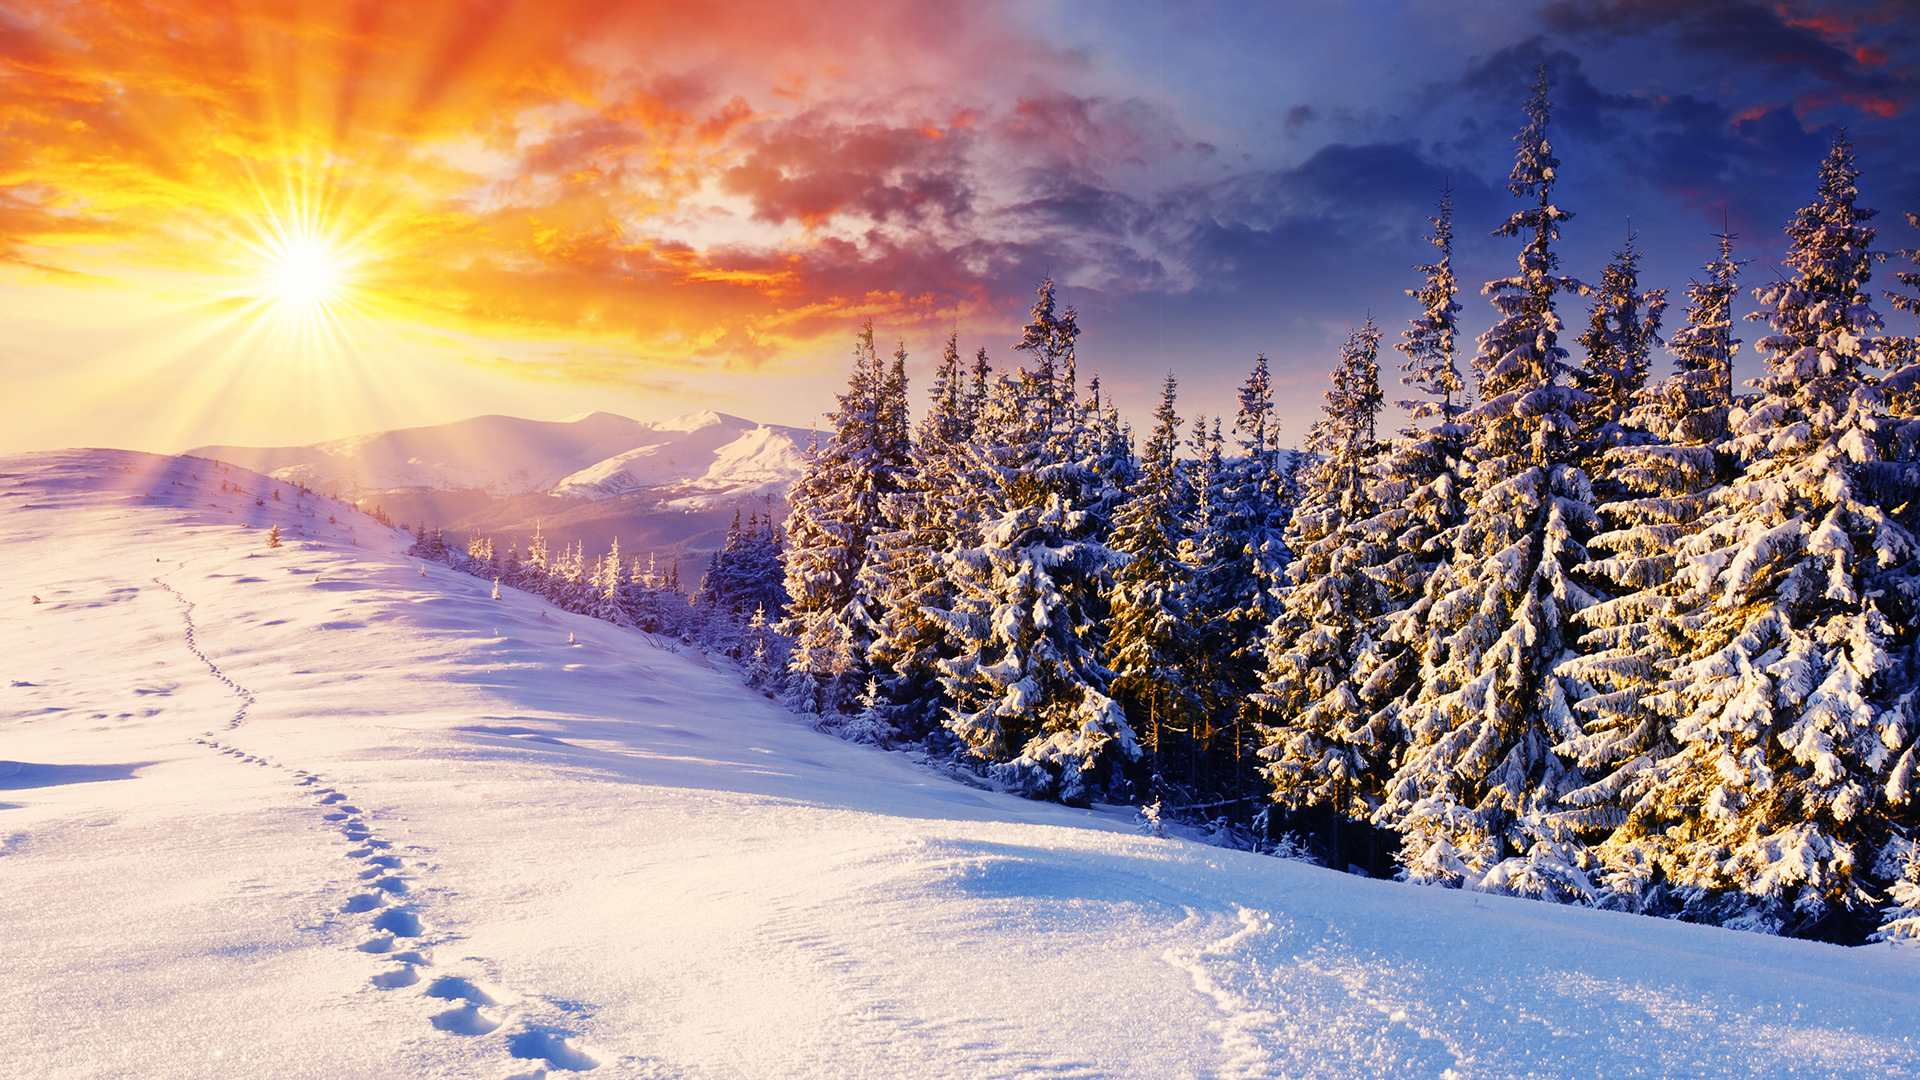 High definition winter wallpapers